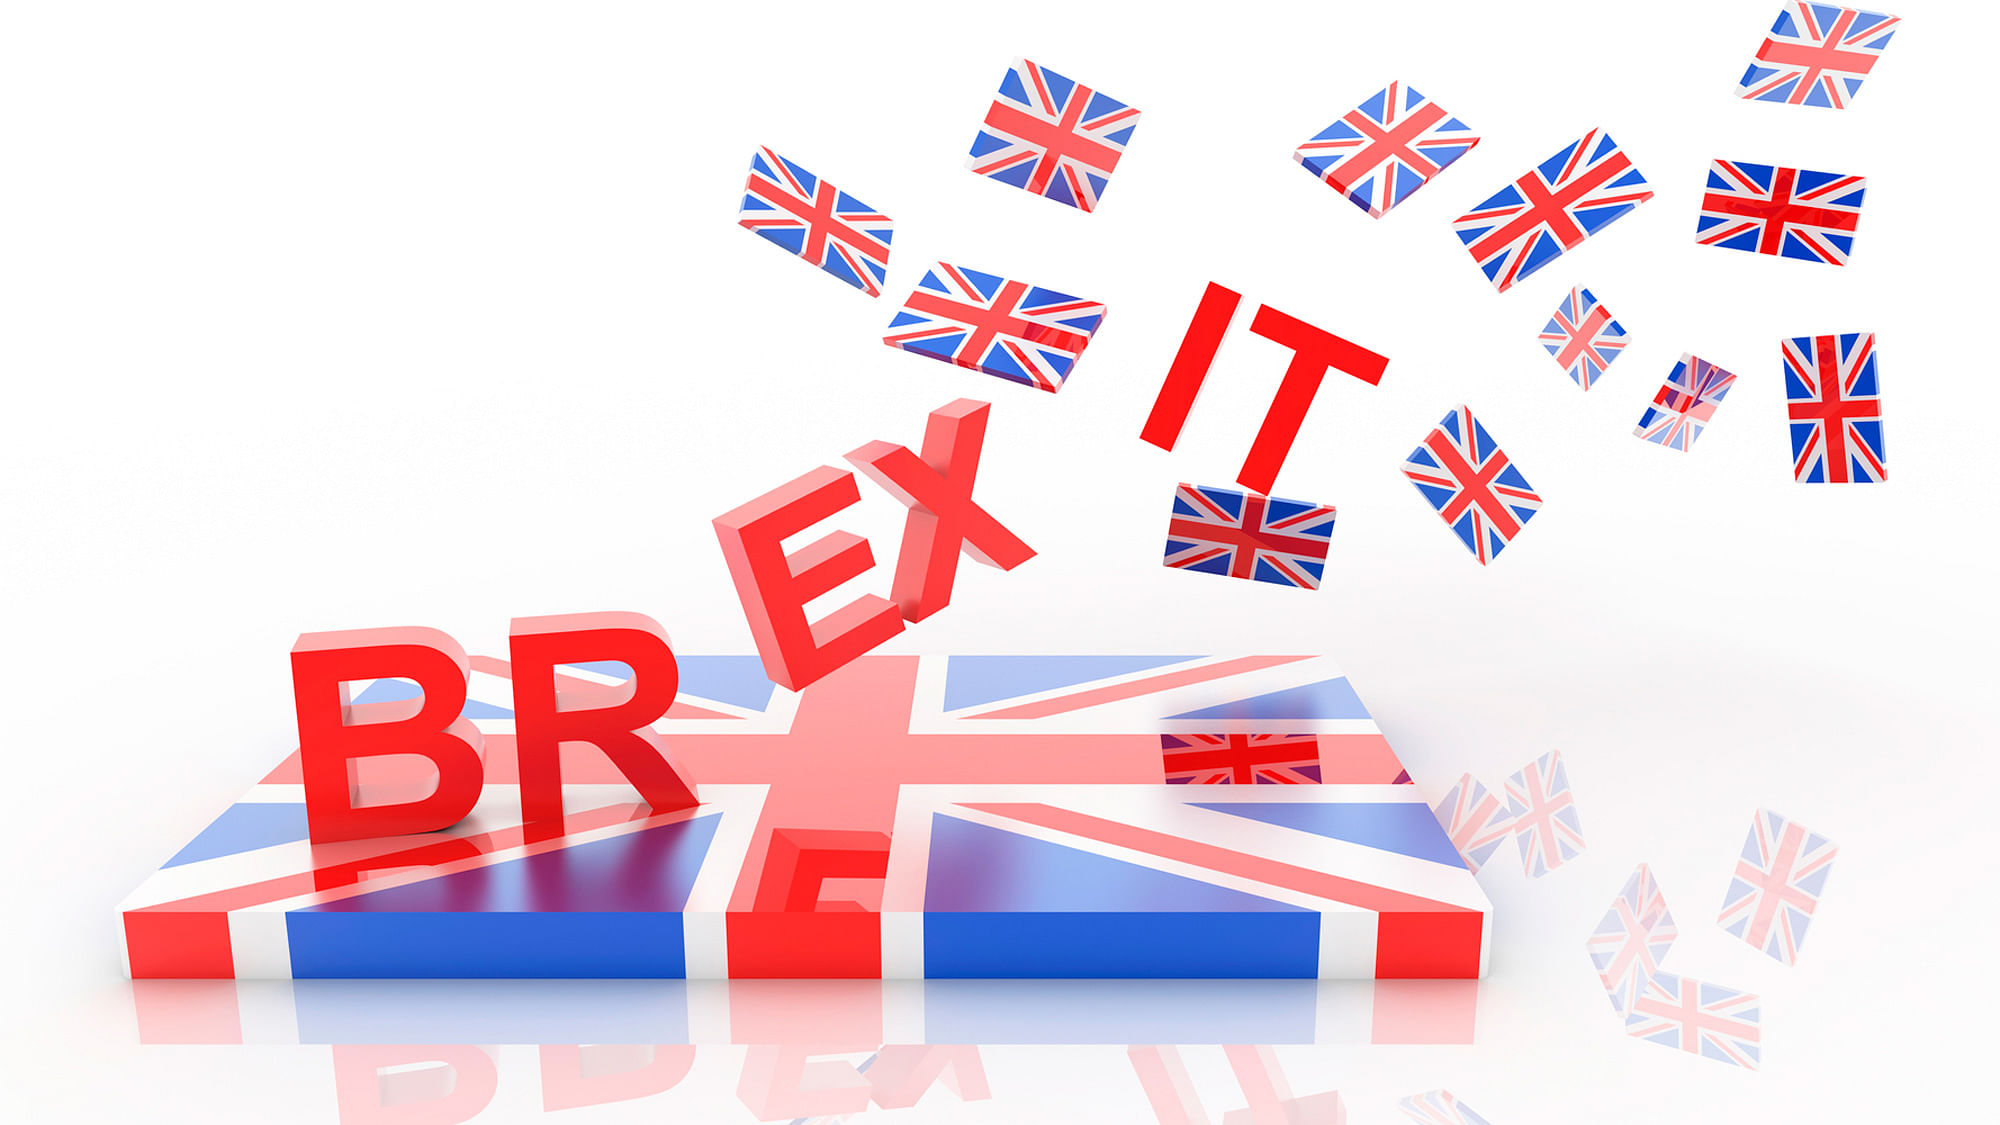 British voters decided to leave the European Union in a referendum on Thursday. (Photo: iStockPhoto)